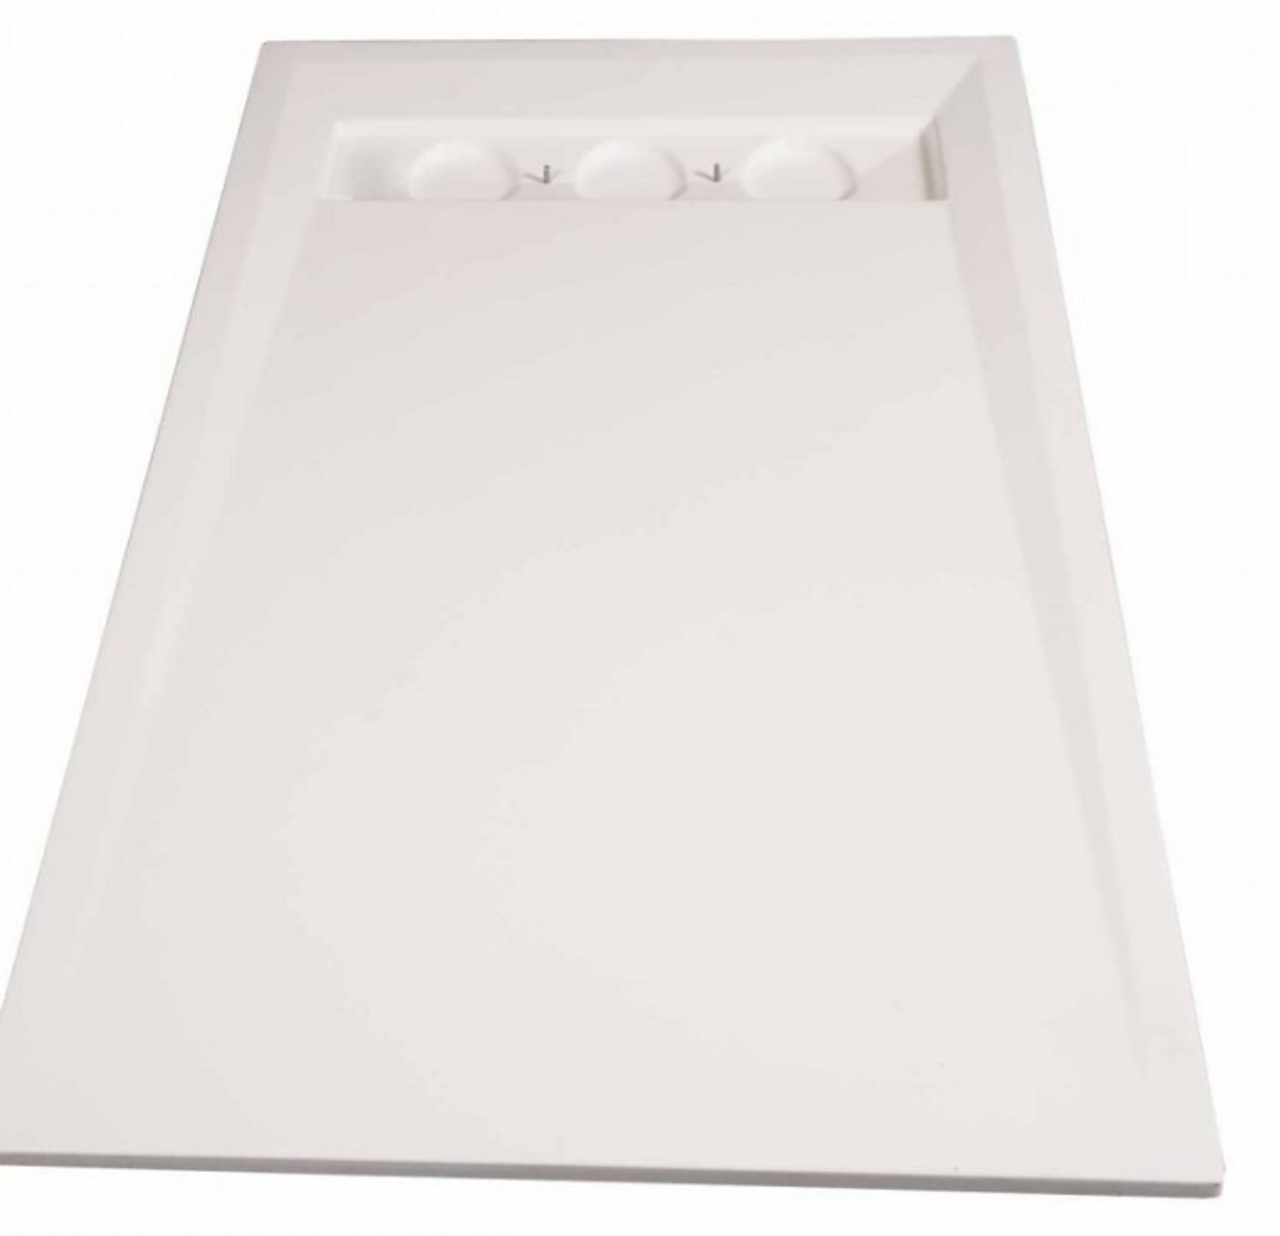 TrueDek Linear Tub Replacement Tile Over Shower Pan 59 X 35-1/2